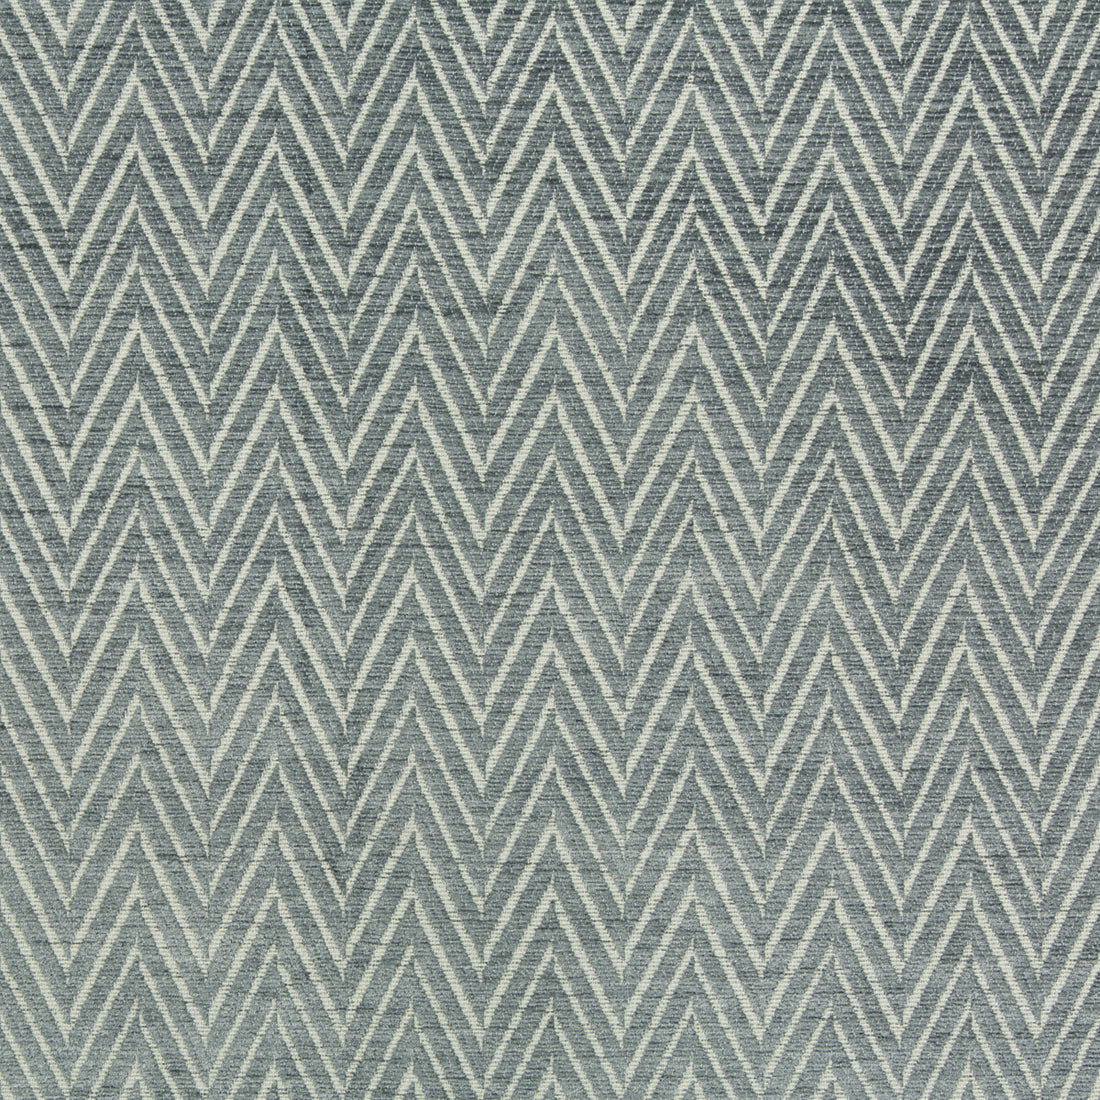 Kravet Design fabric in 34690-11 color - pattern 34690.11.0 - by Kravet Design in the Performance Crypton Home collection